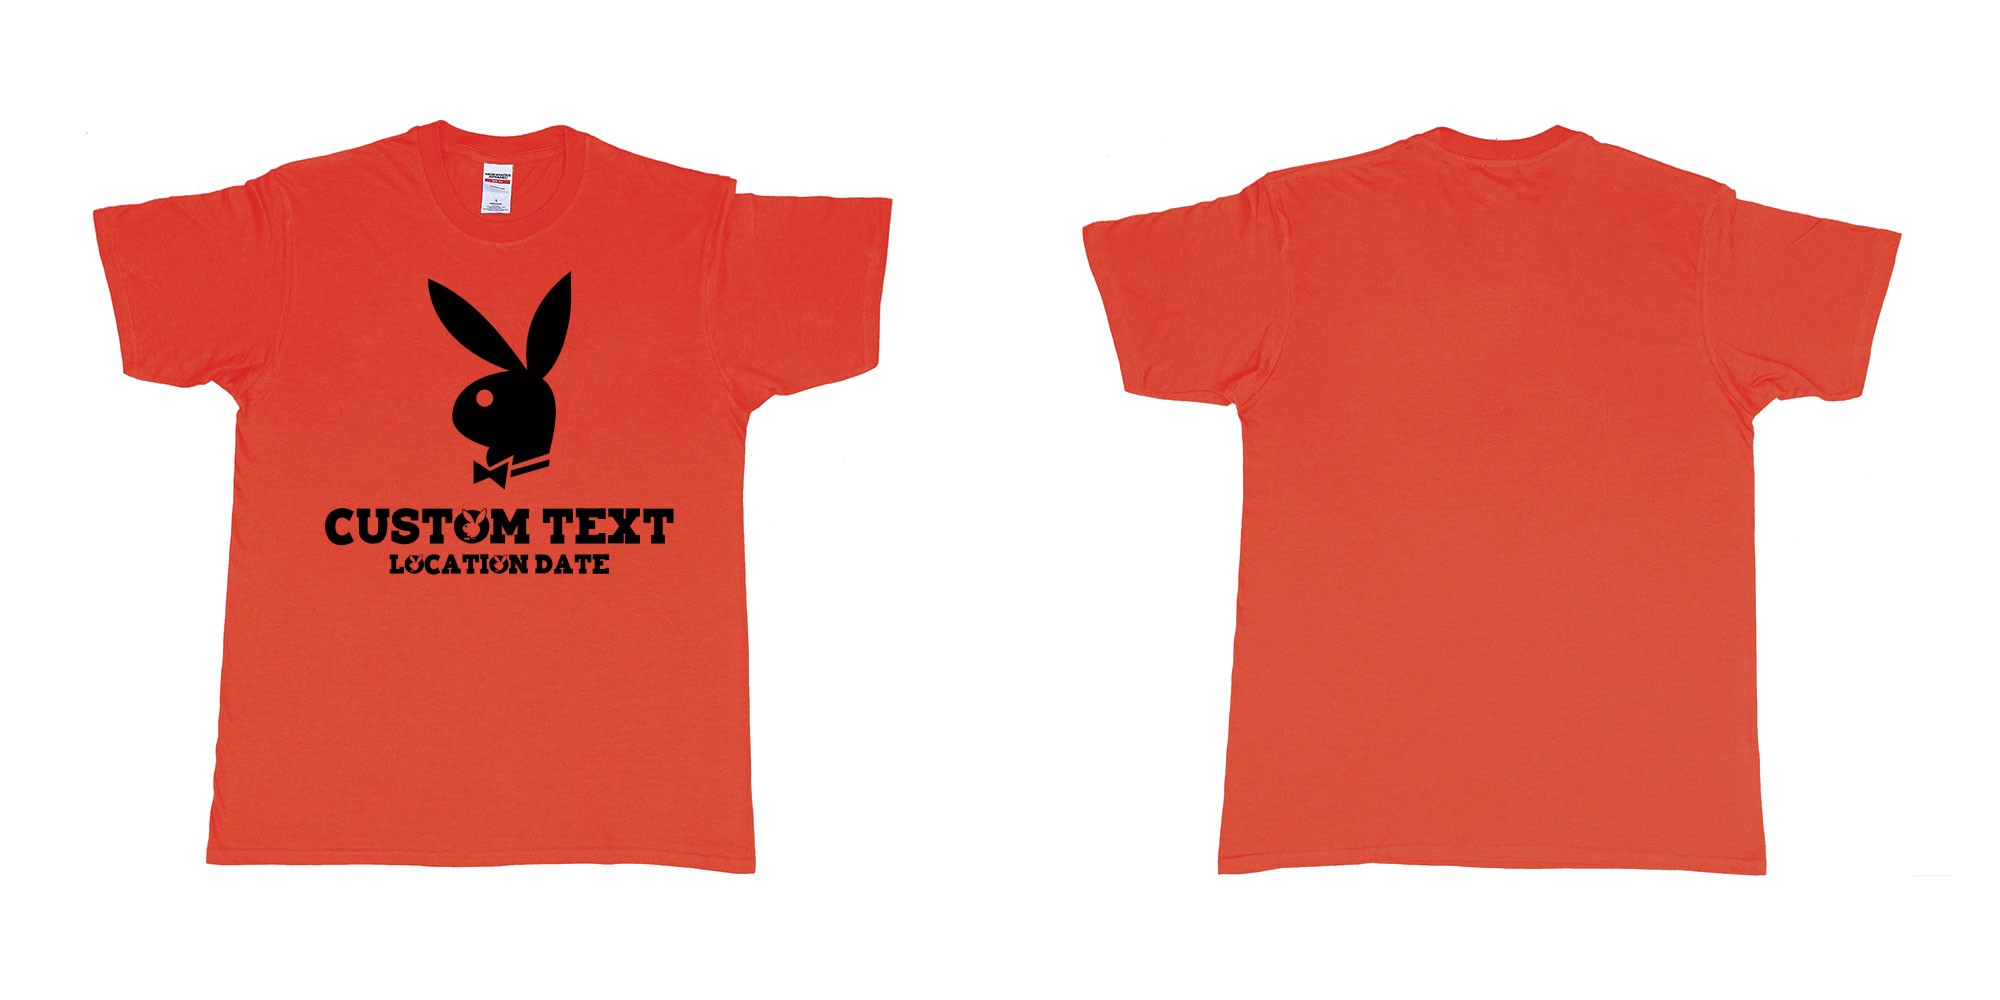 Custom tshirt design playboy playgirl custom text tshirt in fabric color red choice your own text made in Bali by The Pirate Way